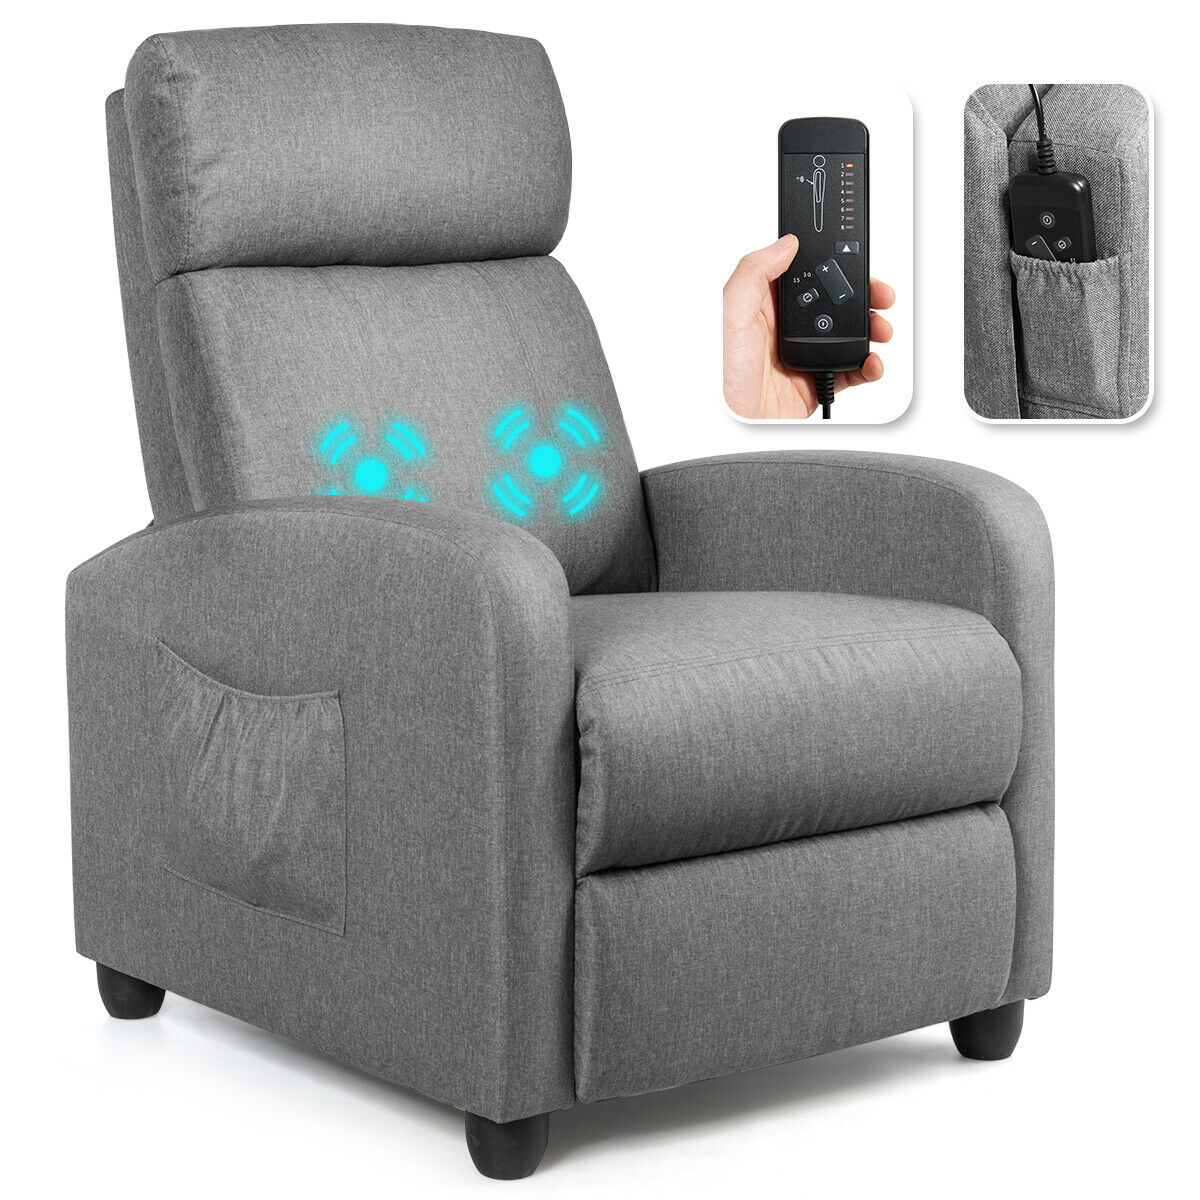 Massage Recliner Chair Single Sofa Padded Seat W/ Footrest - Grey